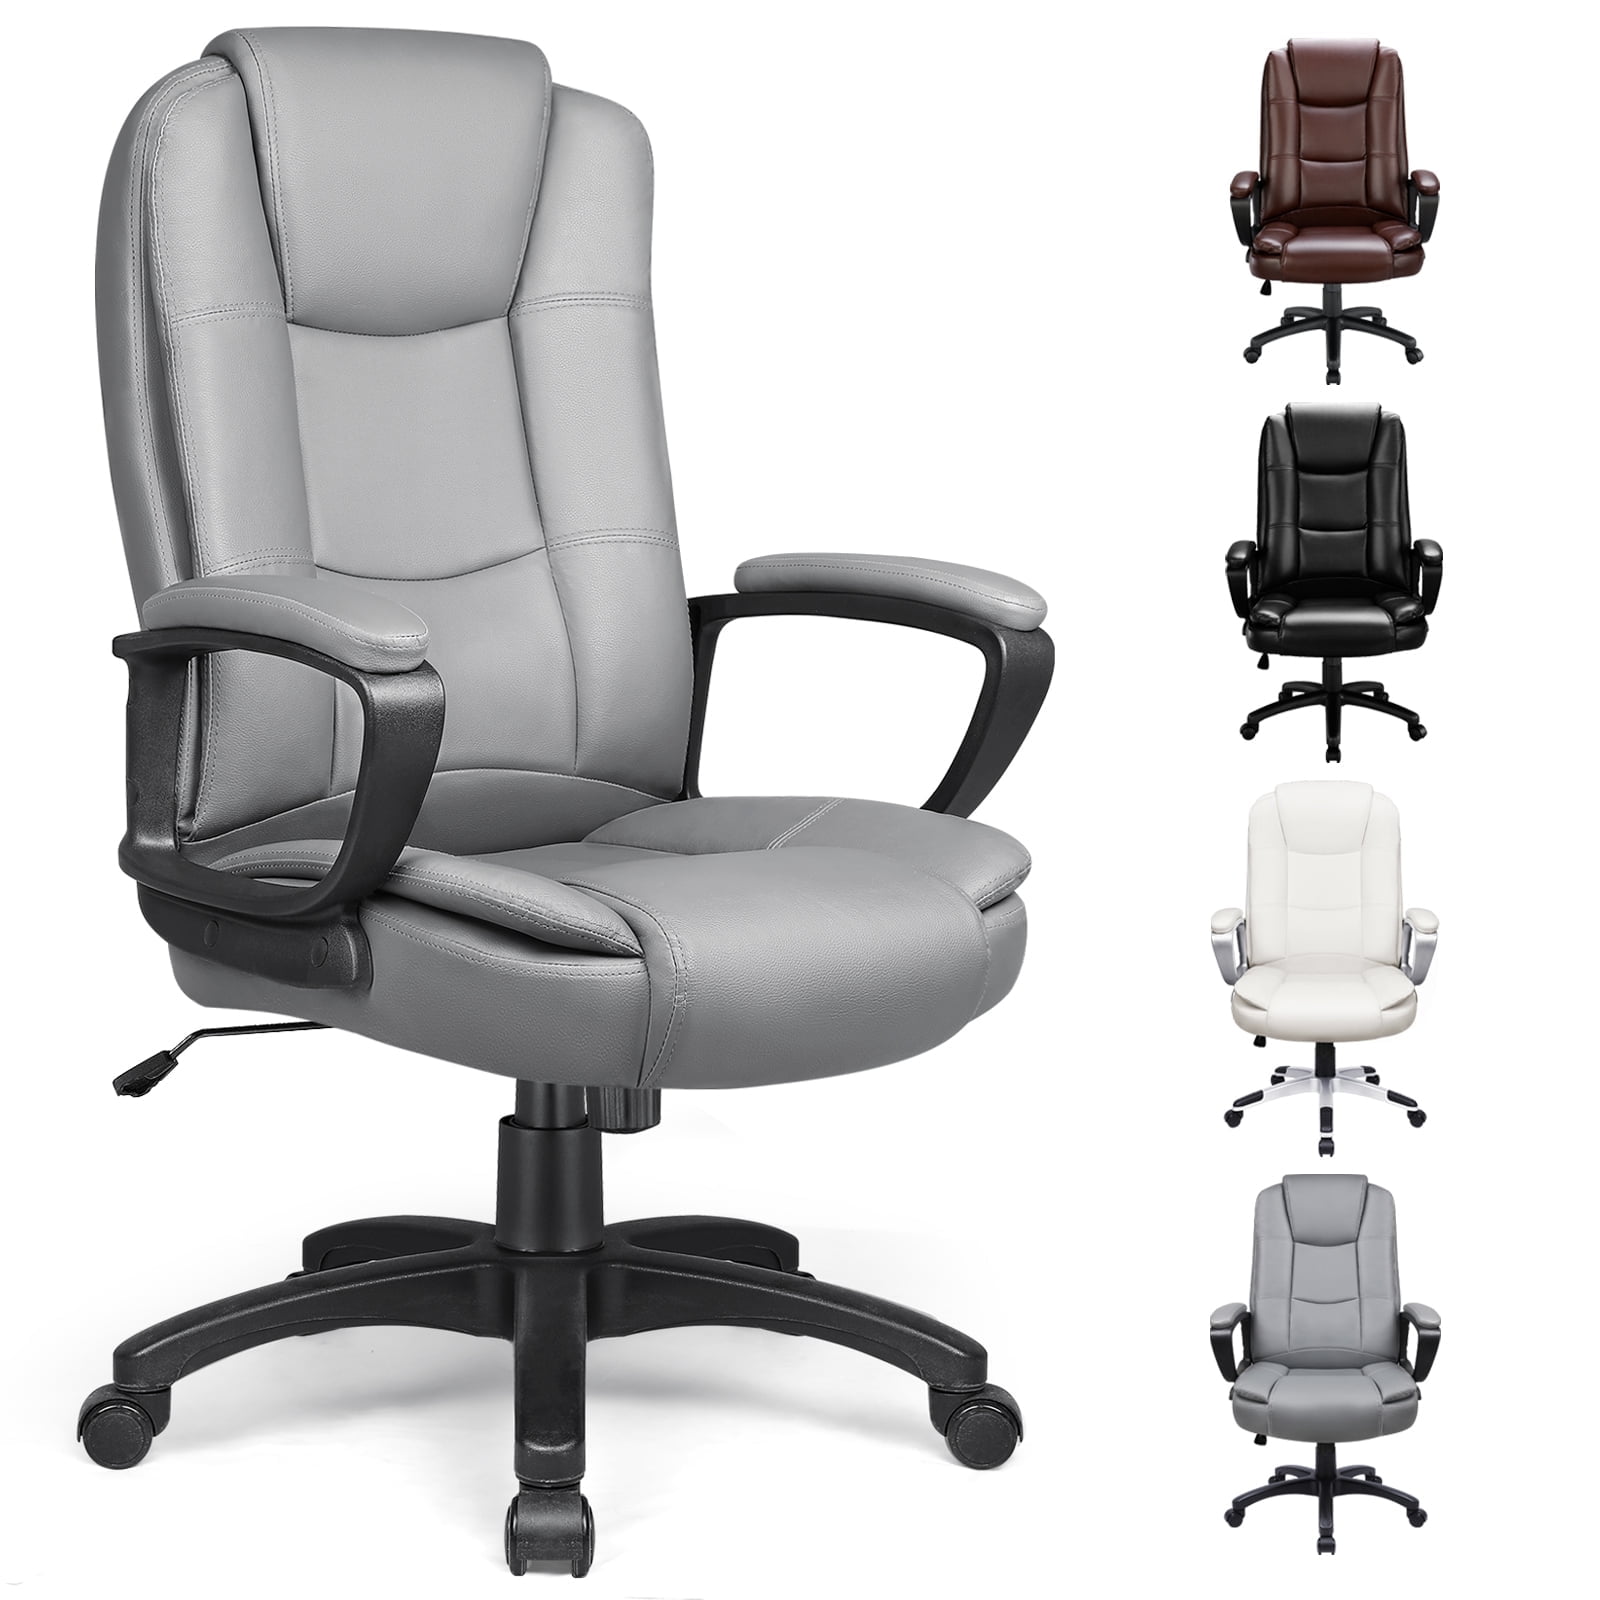 Waleaf Home Office Chair, 8Hours Heavy Duty Design, Ergonomic High Back  Cushion Lumbar Back Support, Computer Desk Chair, Big and Tall Chair